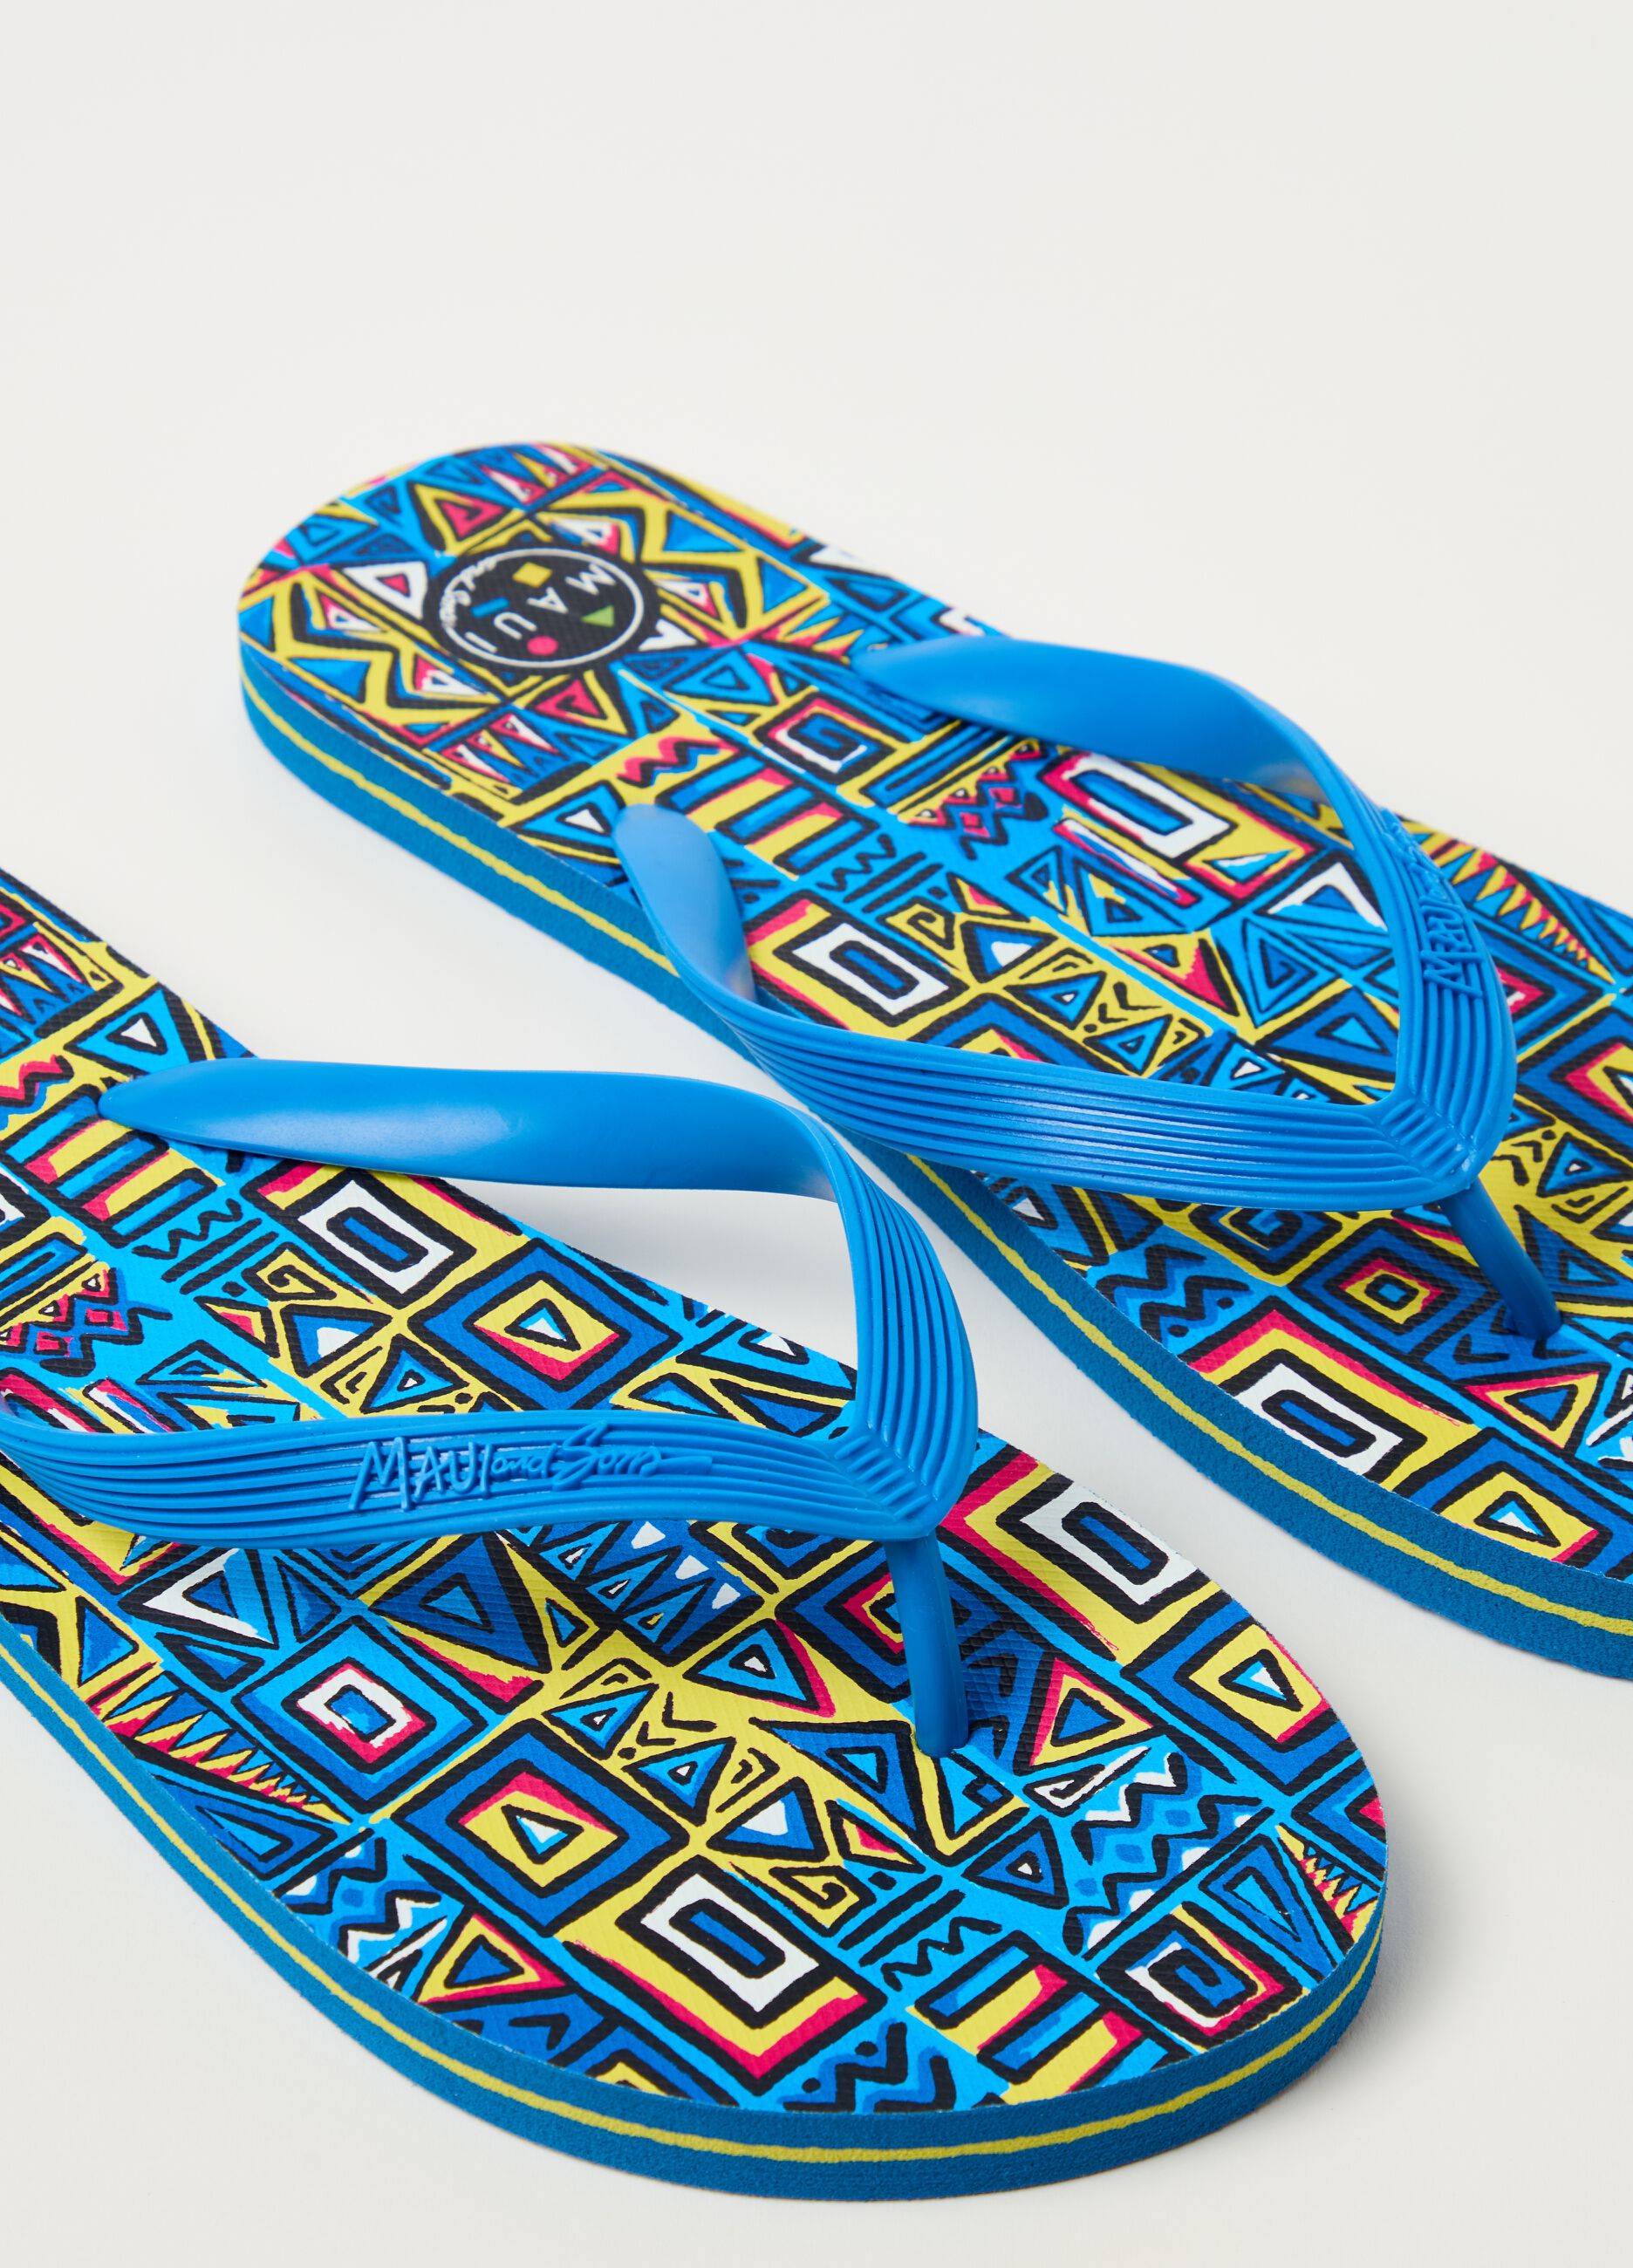 Thong sandals with ethnic print